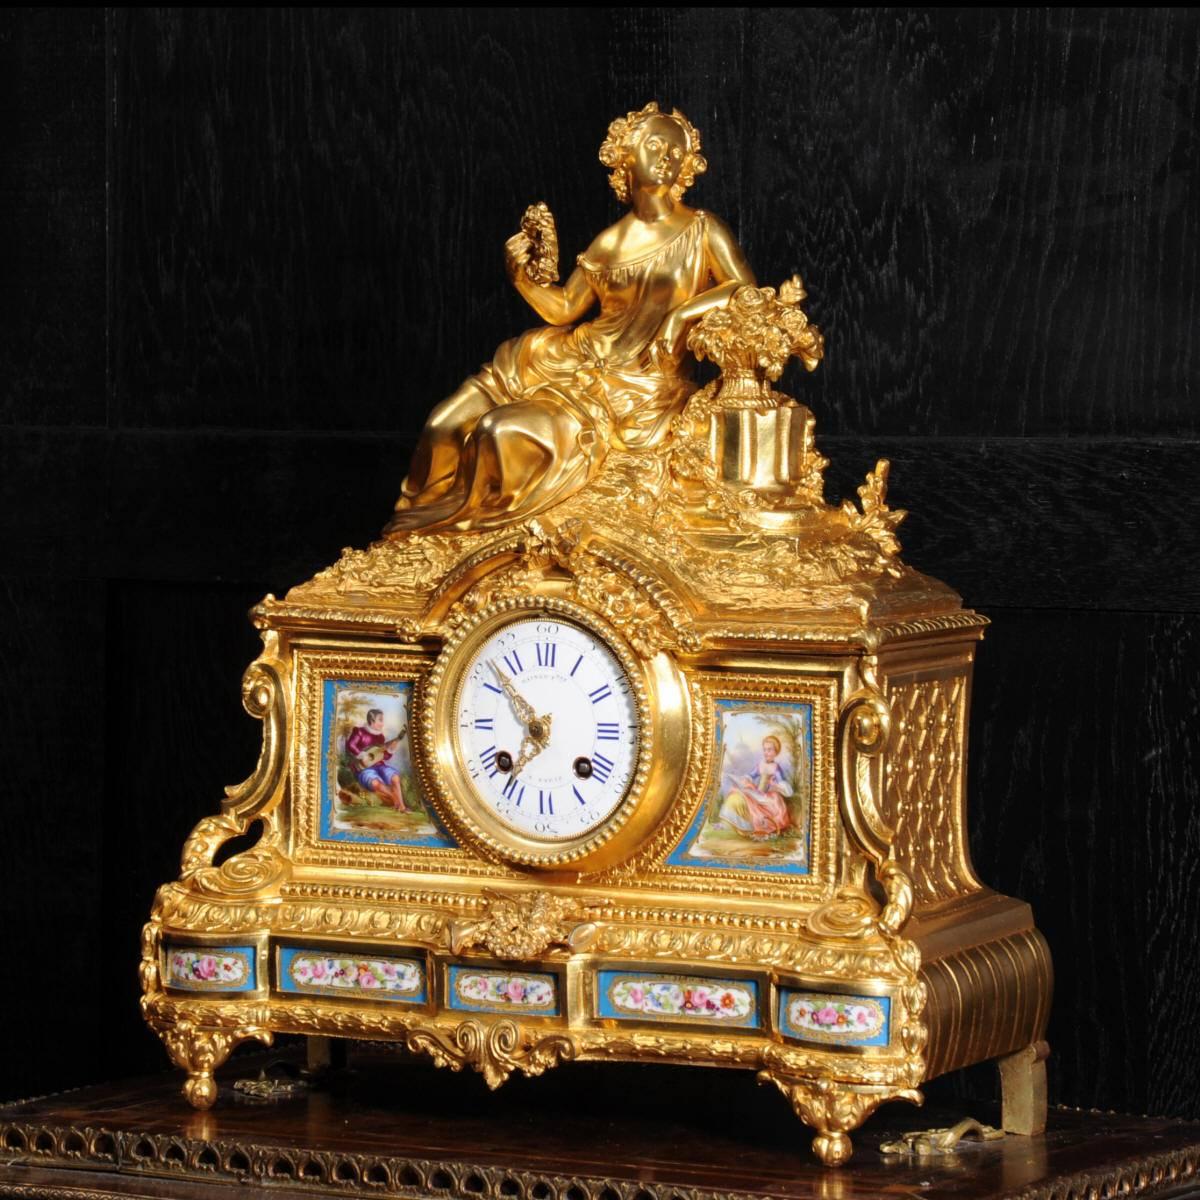 A very fine and early ormolu (finely gilded bronze) clock mounted with exquisite Sèvres style porcelain panels. It features a beautifully modelled figure of a goddess holding a laurel wreath, a symbol of victory. To each side of the dial are